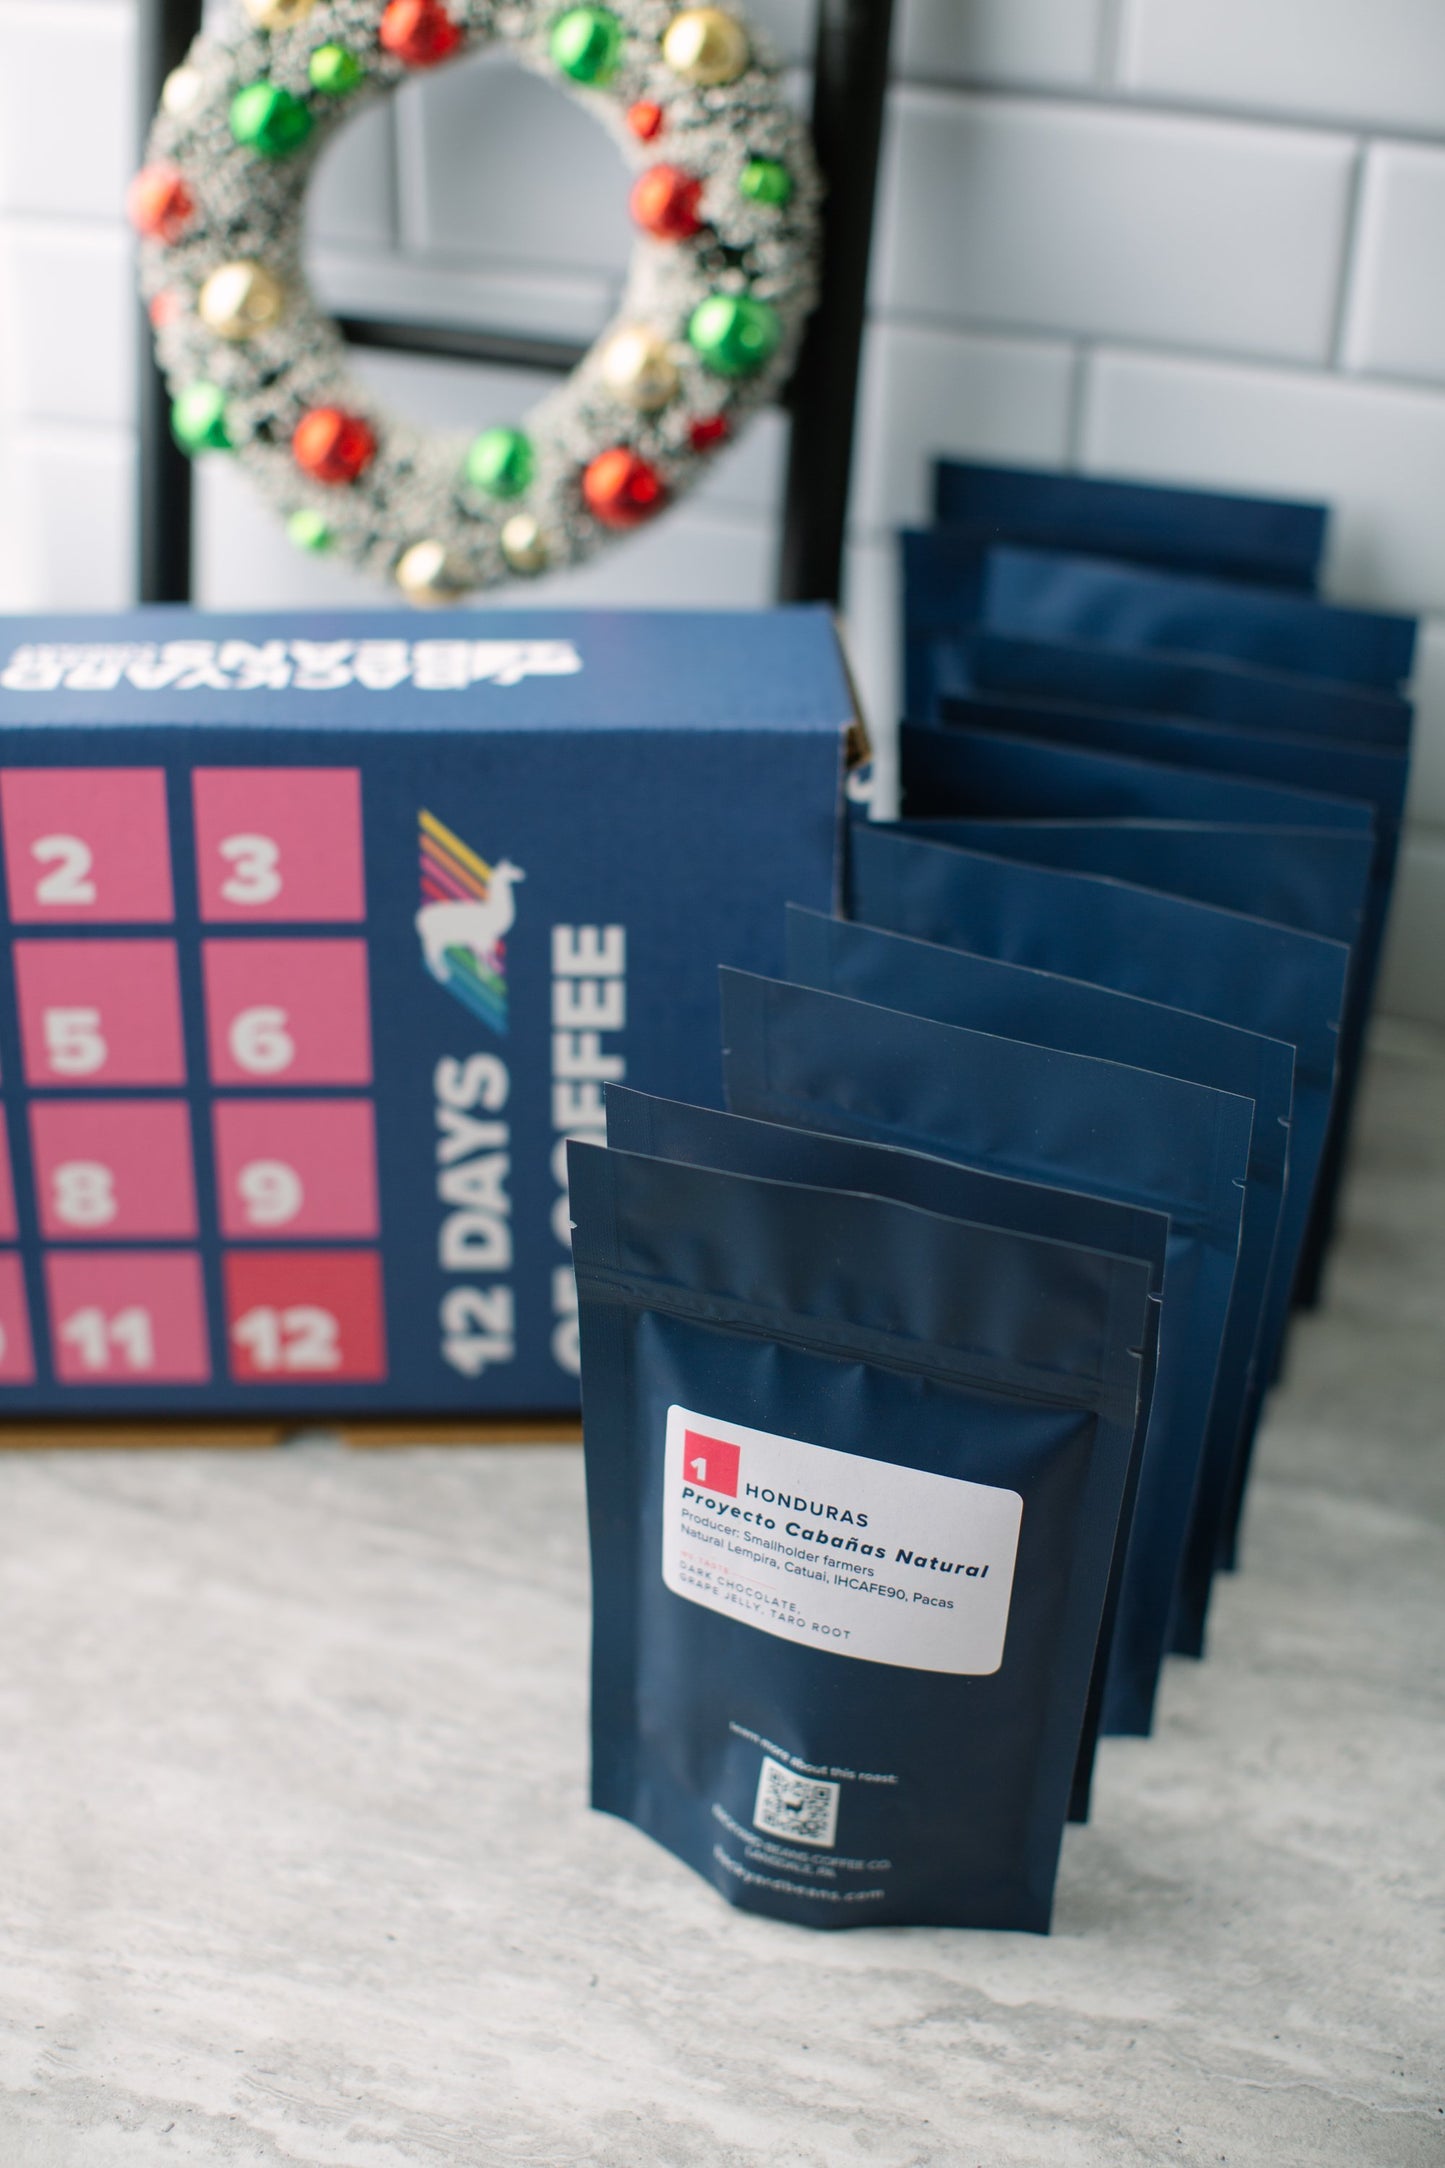 Image of 12 Days of Coffee box and coffee bags.